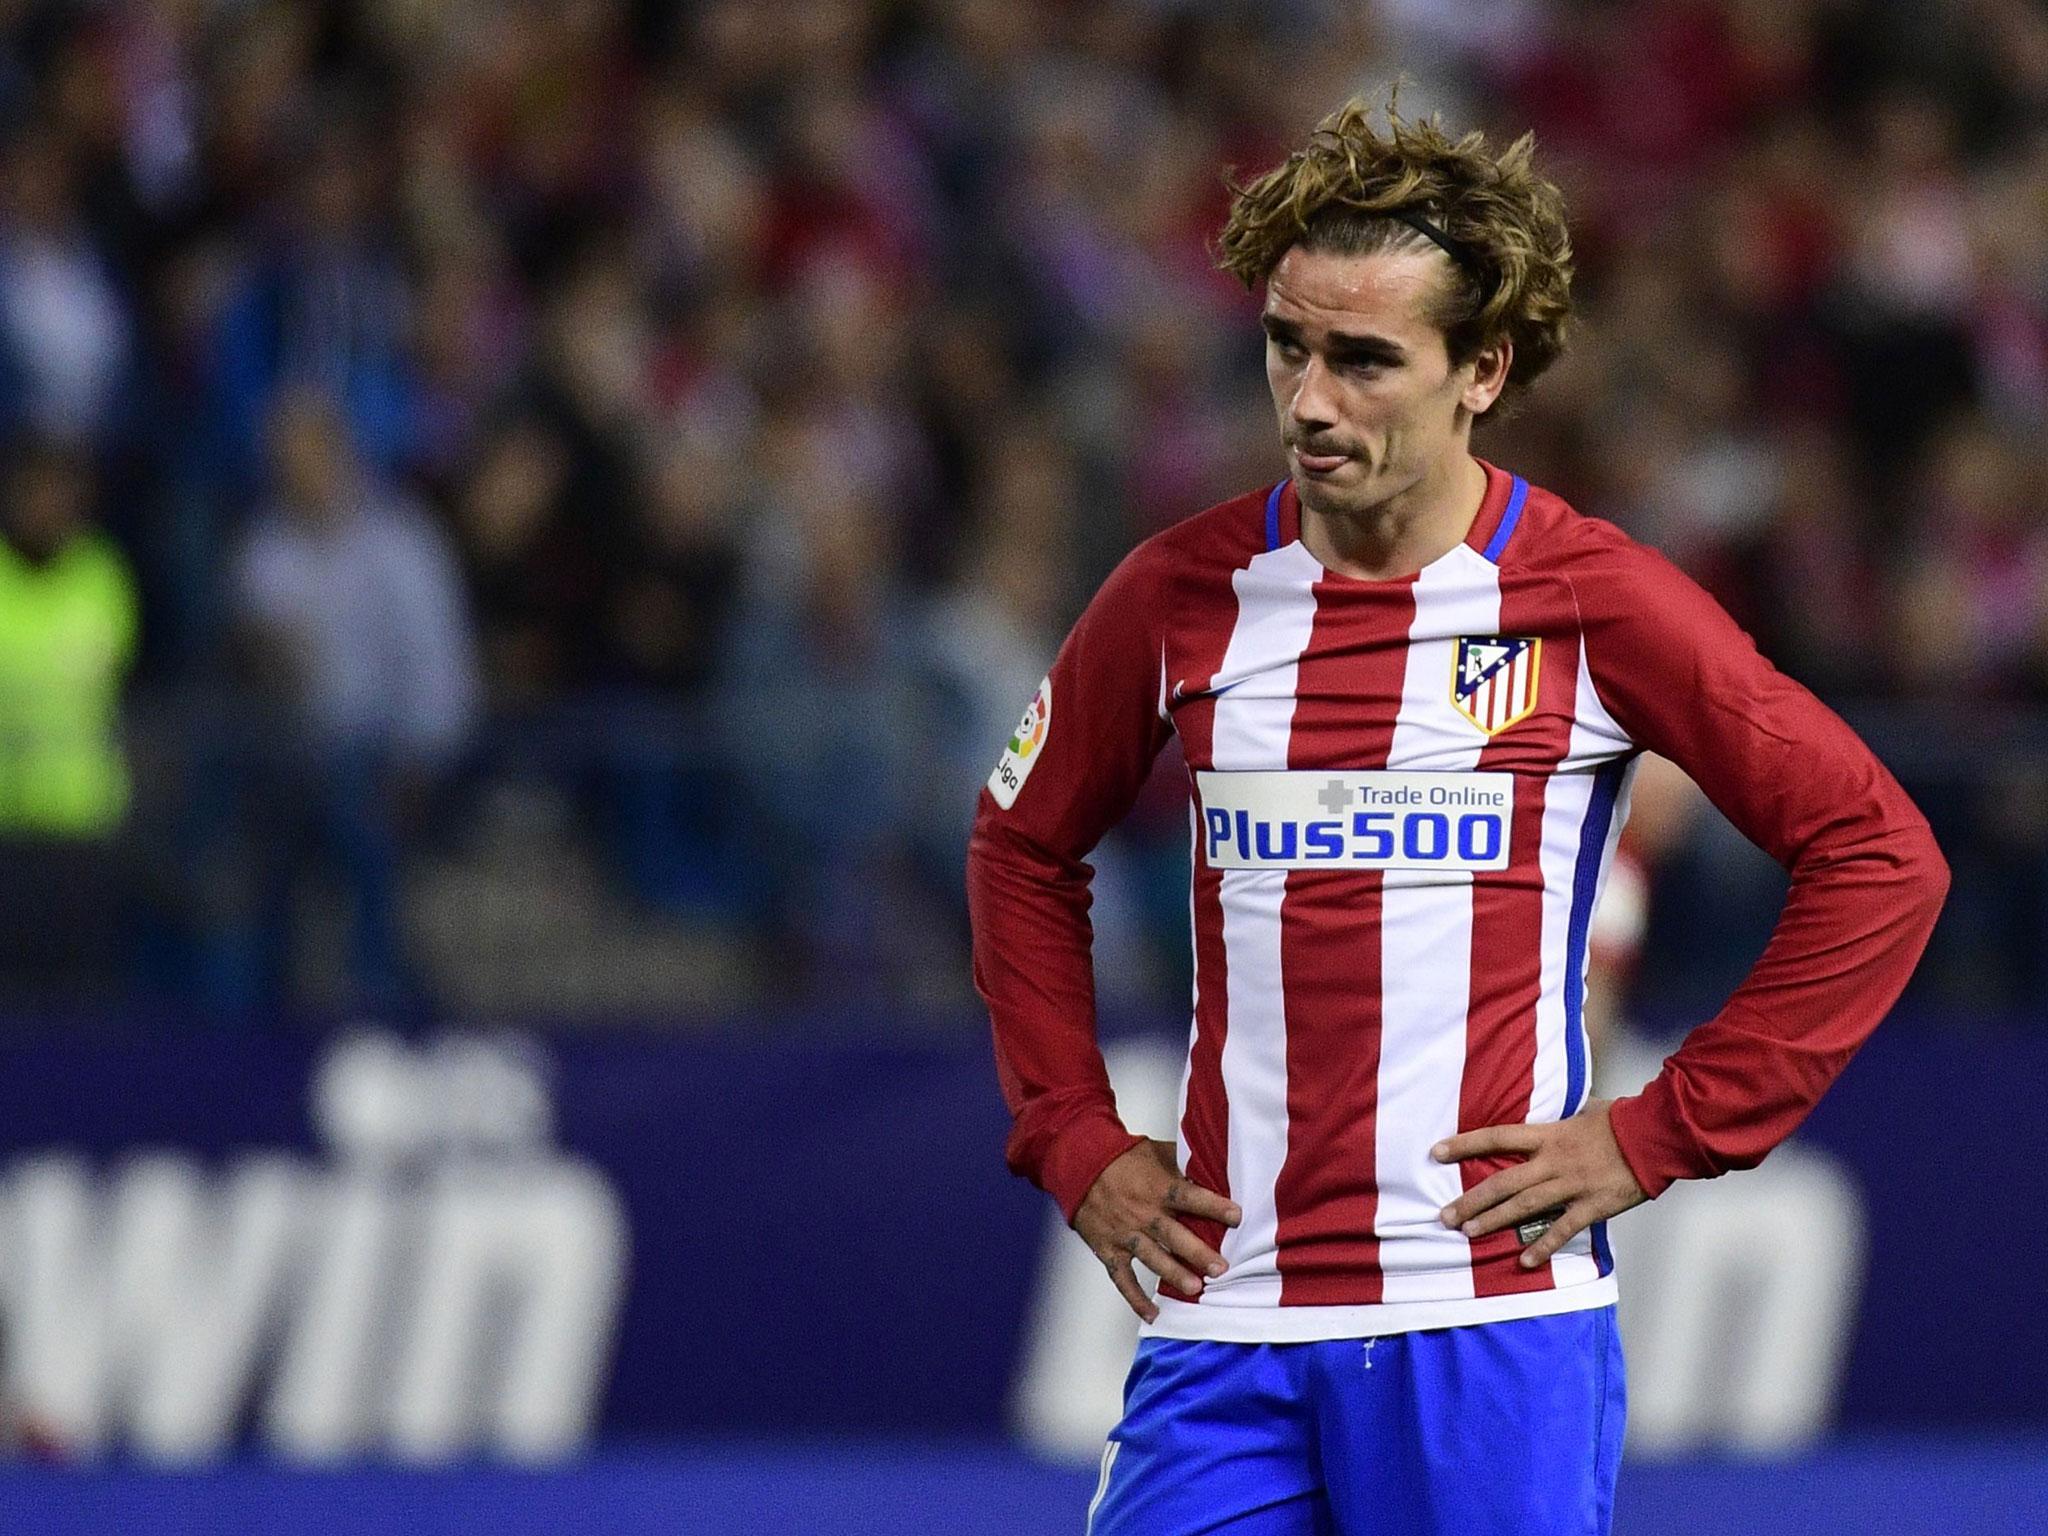 Manchester United are interested in signing Antoine Griezmann this summer